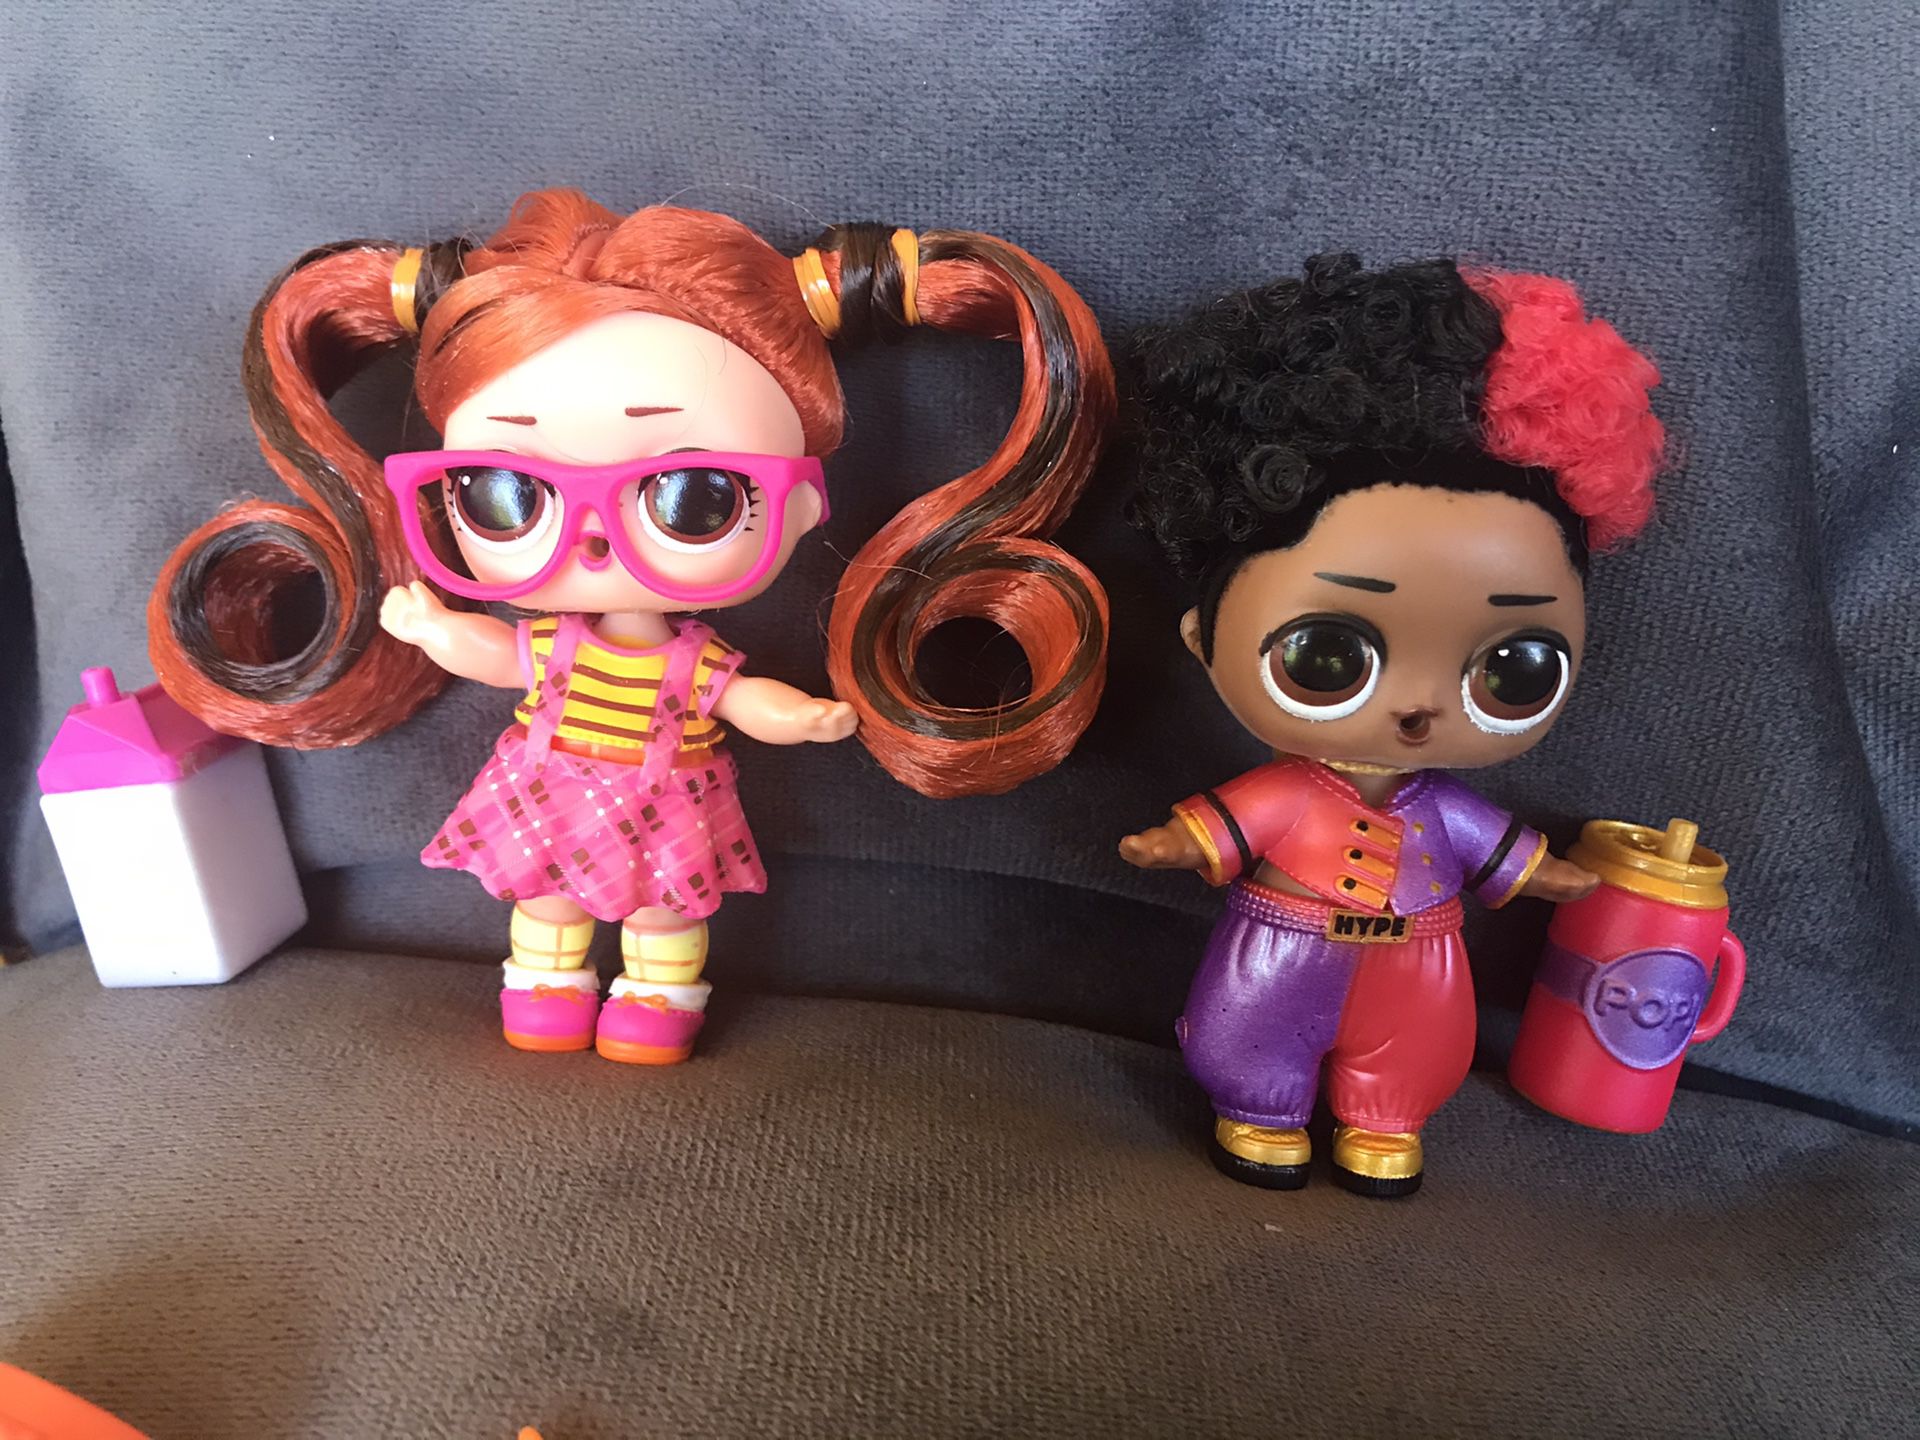 Lol surprise dolls new, both for $18